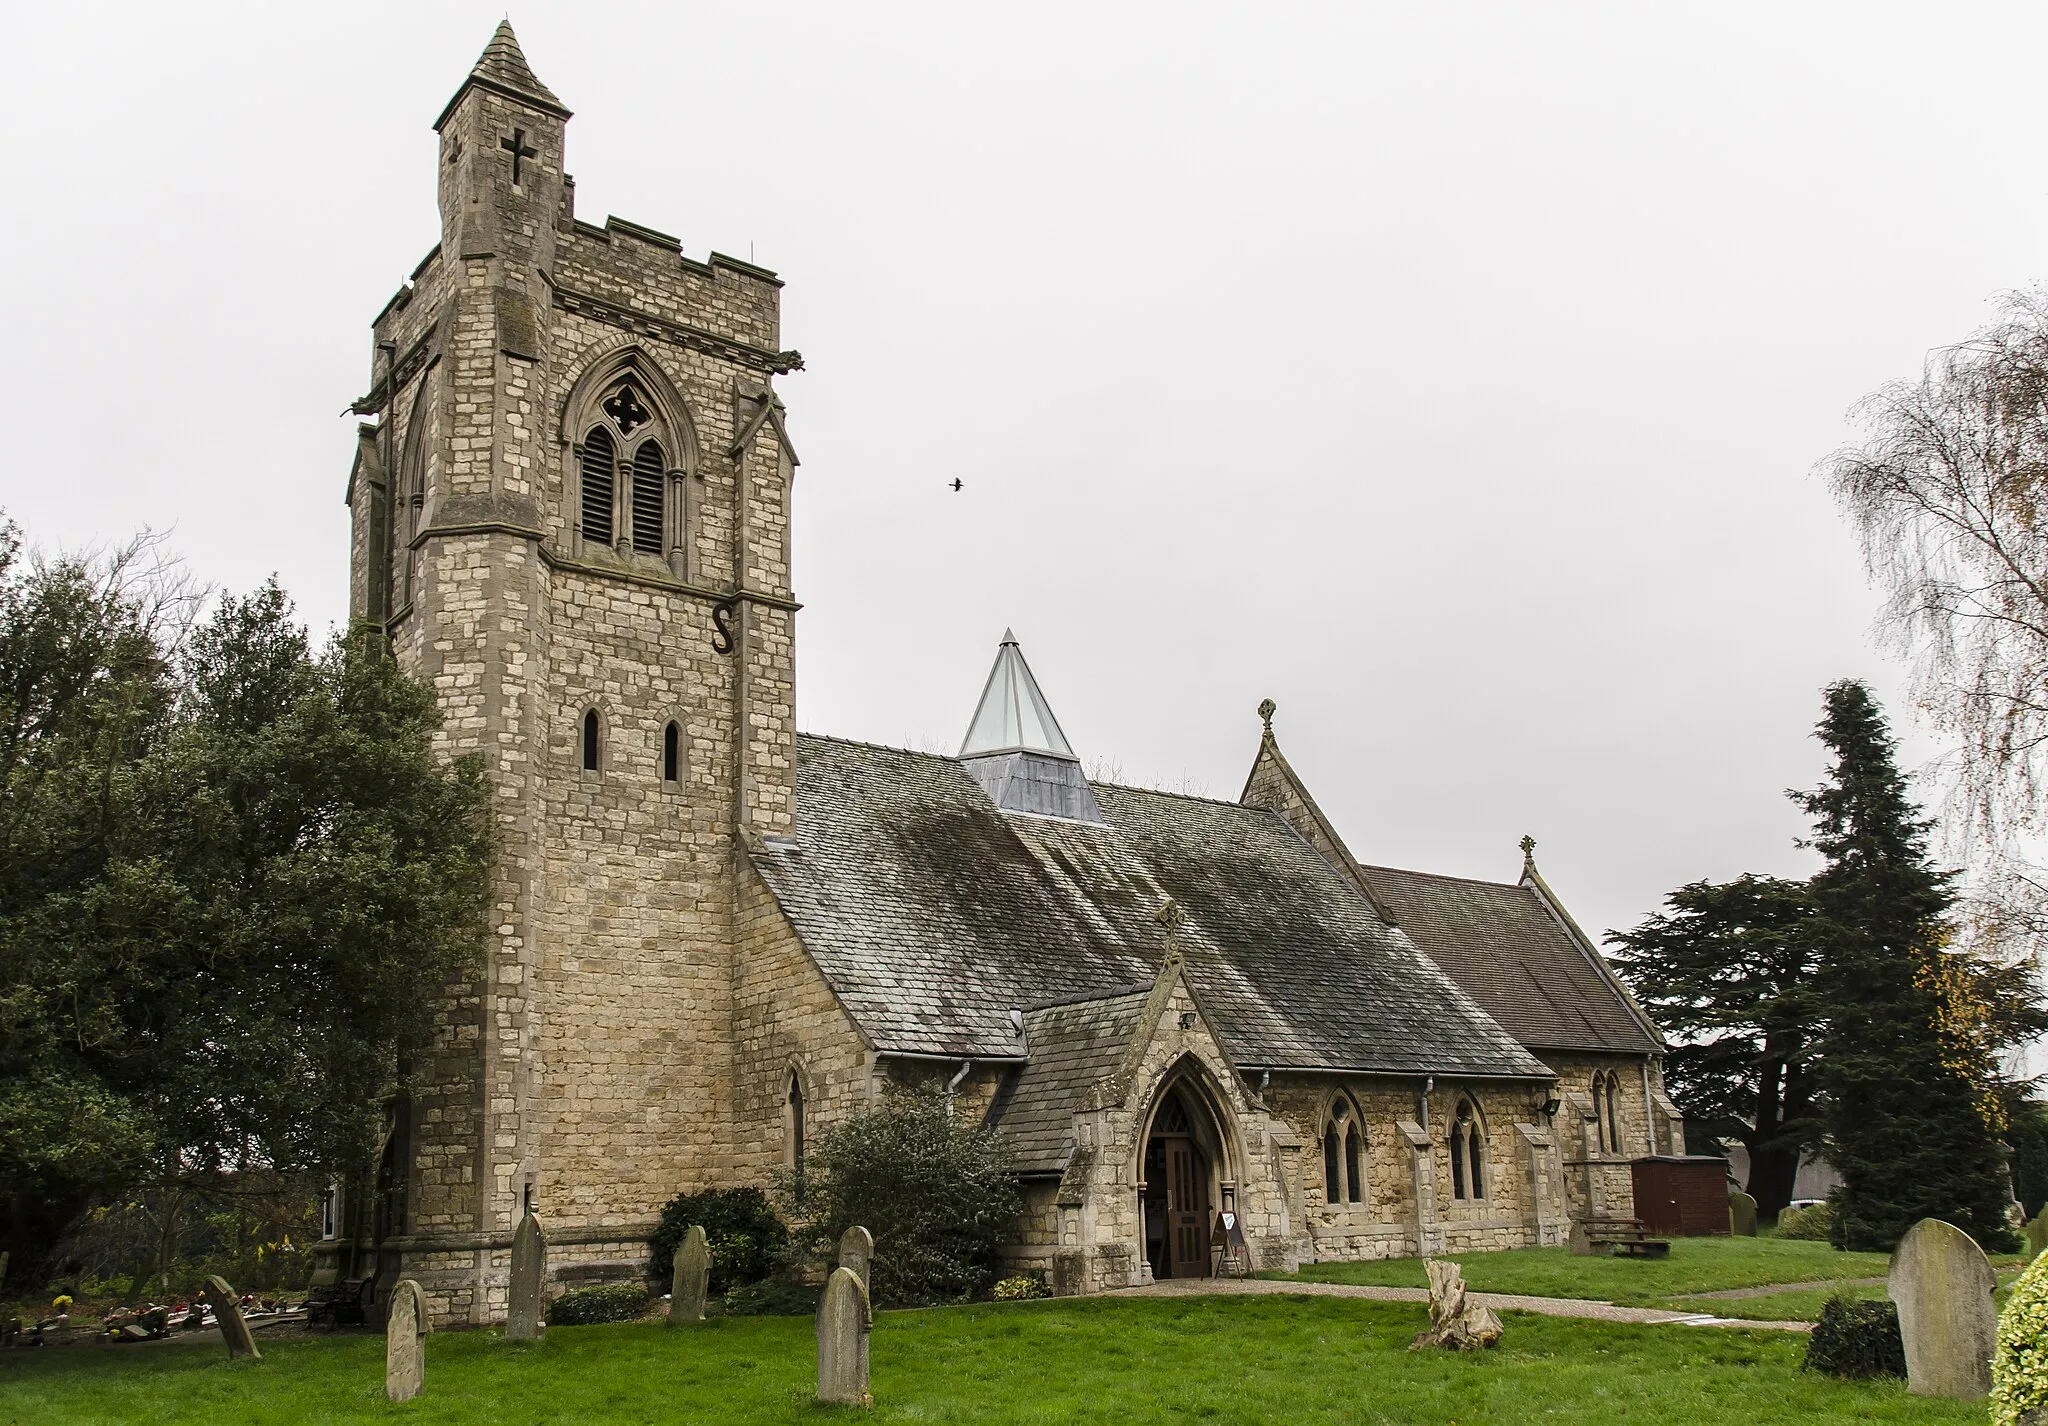 Photo showing: There has been a church on the site since the 13th century.
By 1854 the church was in a dilapidated condition and was rebuilt in 1855 by Hussey, using much of the old materials. There was a nave with clerestory, north and south aisles, and also a spire on the tower roof. The lower stages of the tower still contain some mediaeval masonry.
In 1916 there was a severe fire which left only the walls standing. Due to limited funds, only the chancel was given a permanent roof, the nave had a temporary roof which lasted nearly 80 years!
The spire was never rebuilt, and the aisle arcades replaced with brick and concrete ones.
The church was re-ordered in 1992 when the nave and aisle roofs, internal columns and pews were removed, and a new roof which spans the whole width of the church containing a glass lantern skylight.
Services are now held in the nave part of the church, with the chancel being used for the creche and for more intimate services.
There is a fine east window by Edward Payne.

The church now has a Kitchen, toilet and Wi-fi.